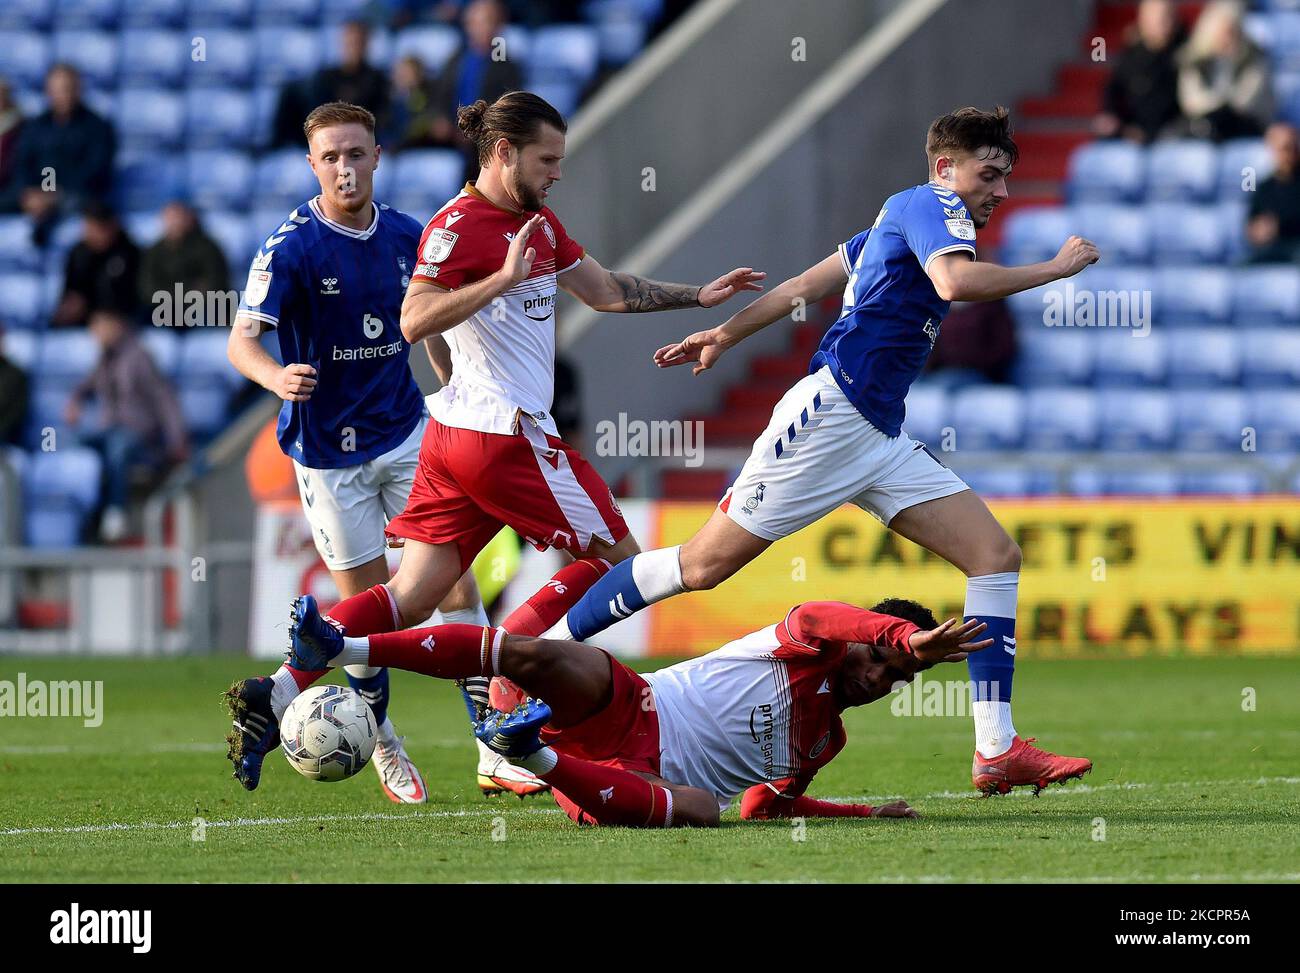 Oldham Athletic's Jamie Bowden tussles with Terence Vancooten of Stevenage Football Club during the Sky Bet League 2 match between Oldham Athletic and Stevenage at Boundary Park, Oldham on Saturday 16th October 2021. (Photo by Eddie Garvey/MI News/NurPhoto) Stock Photo